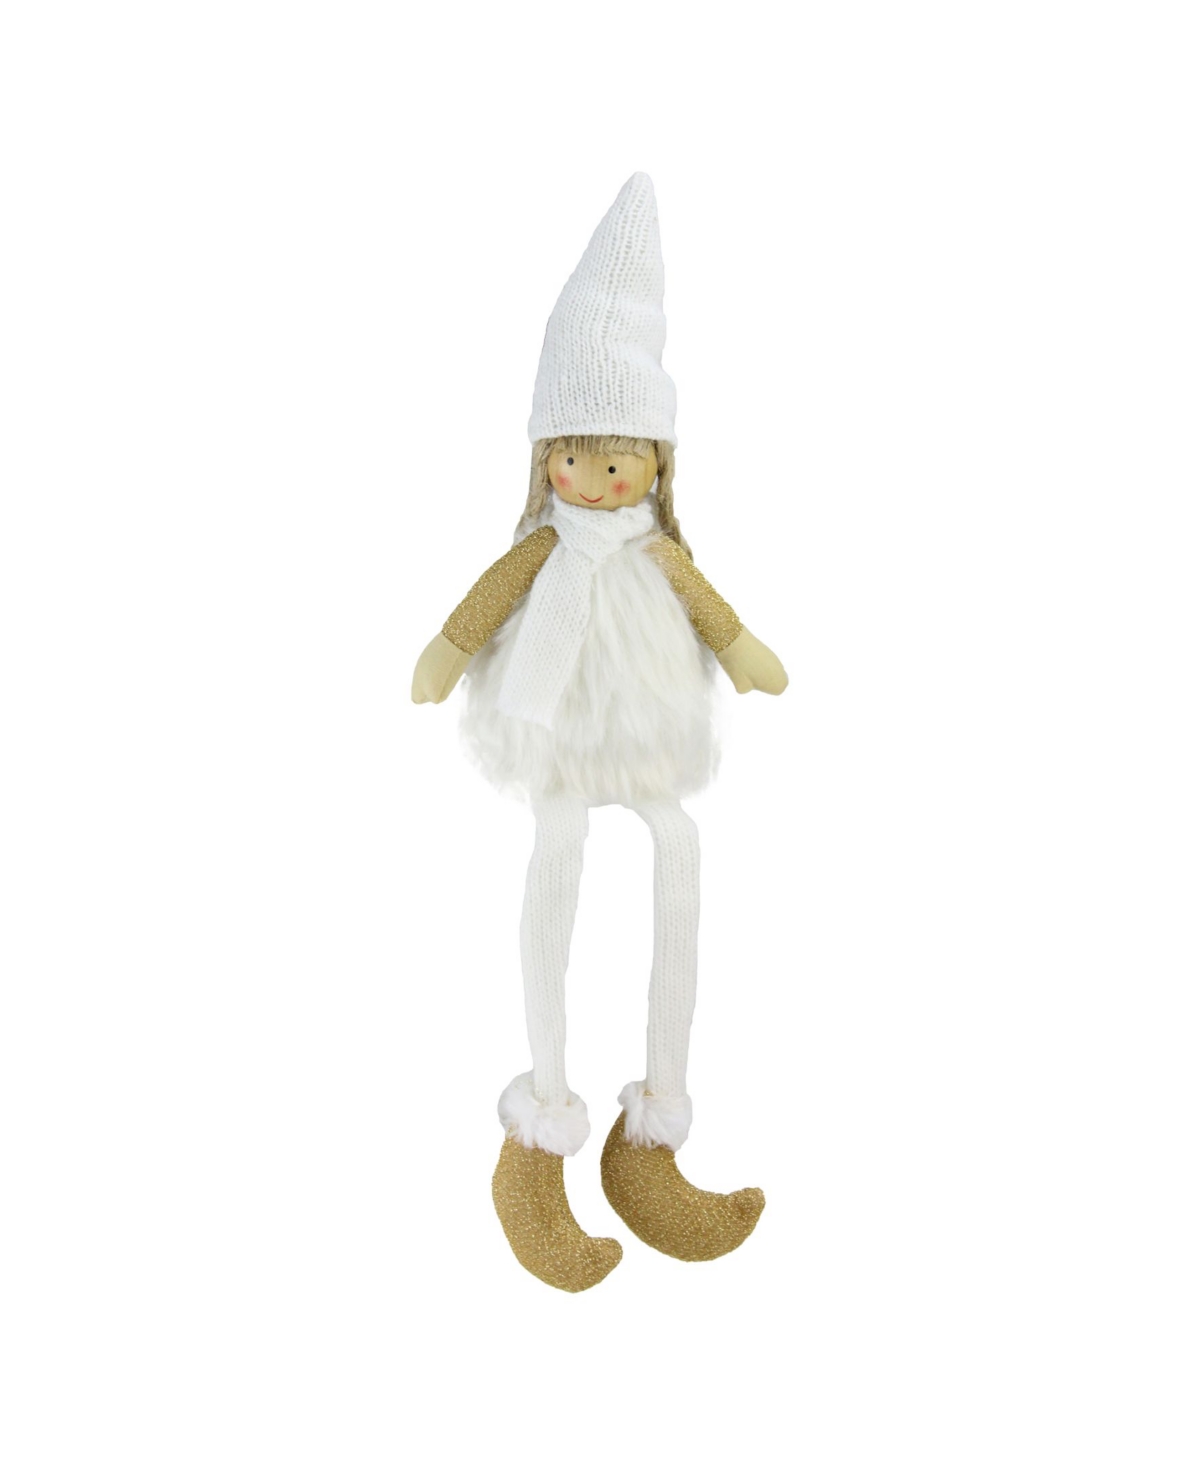 16" Sitting Girl with Hat Scarf and Dangling Legs Tabletop Decoration - Gold